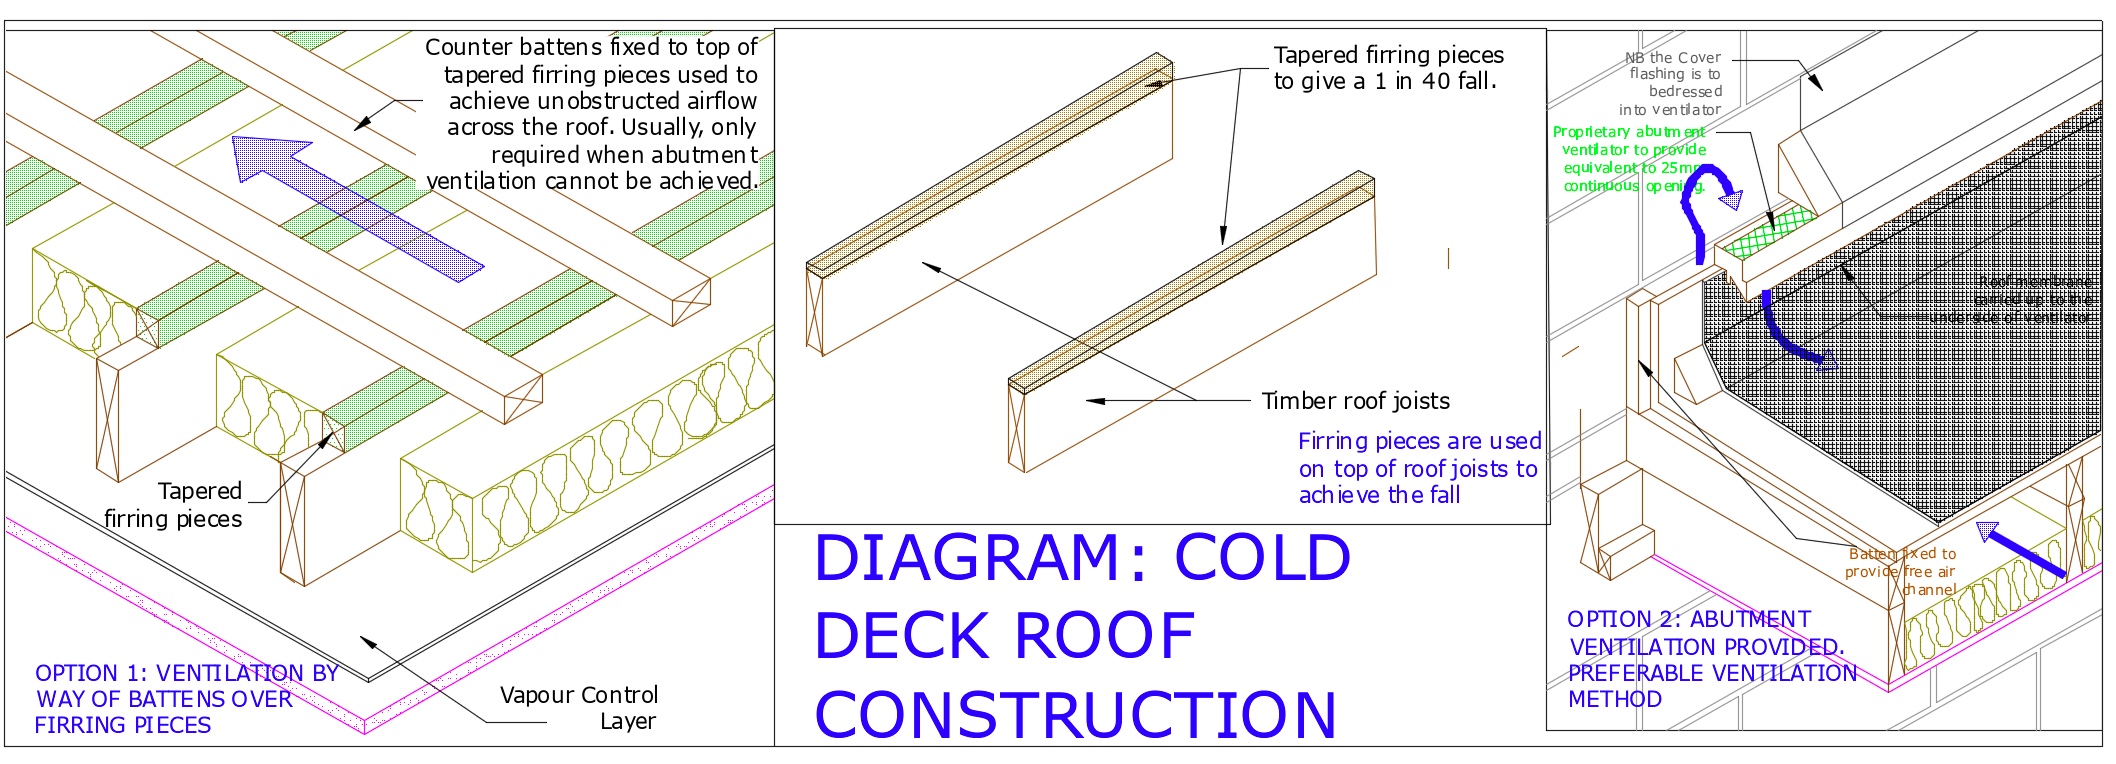 Diagram D77 - Typical cold deck roof construction with adequate ventilation